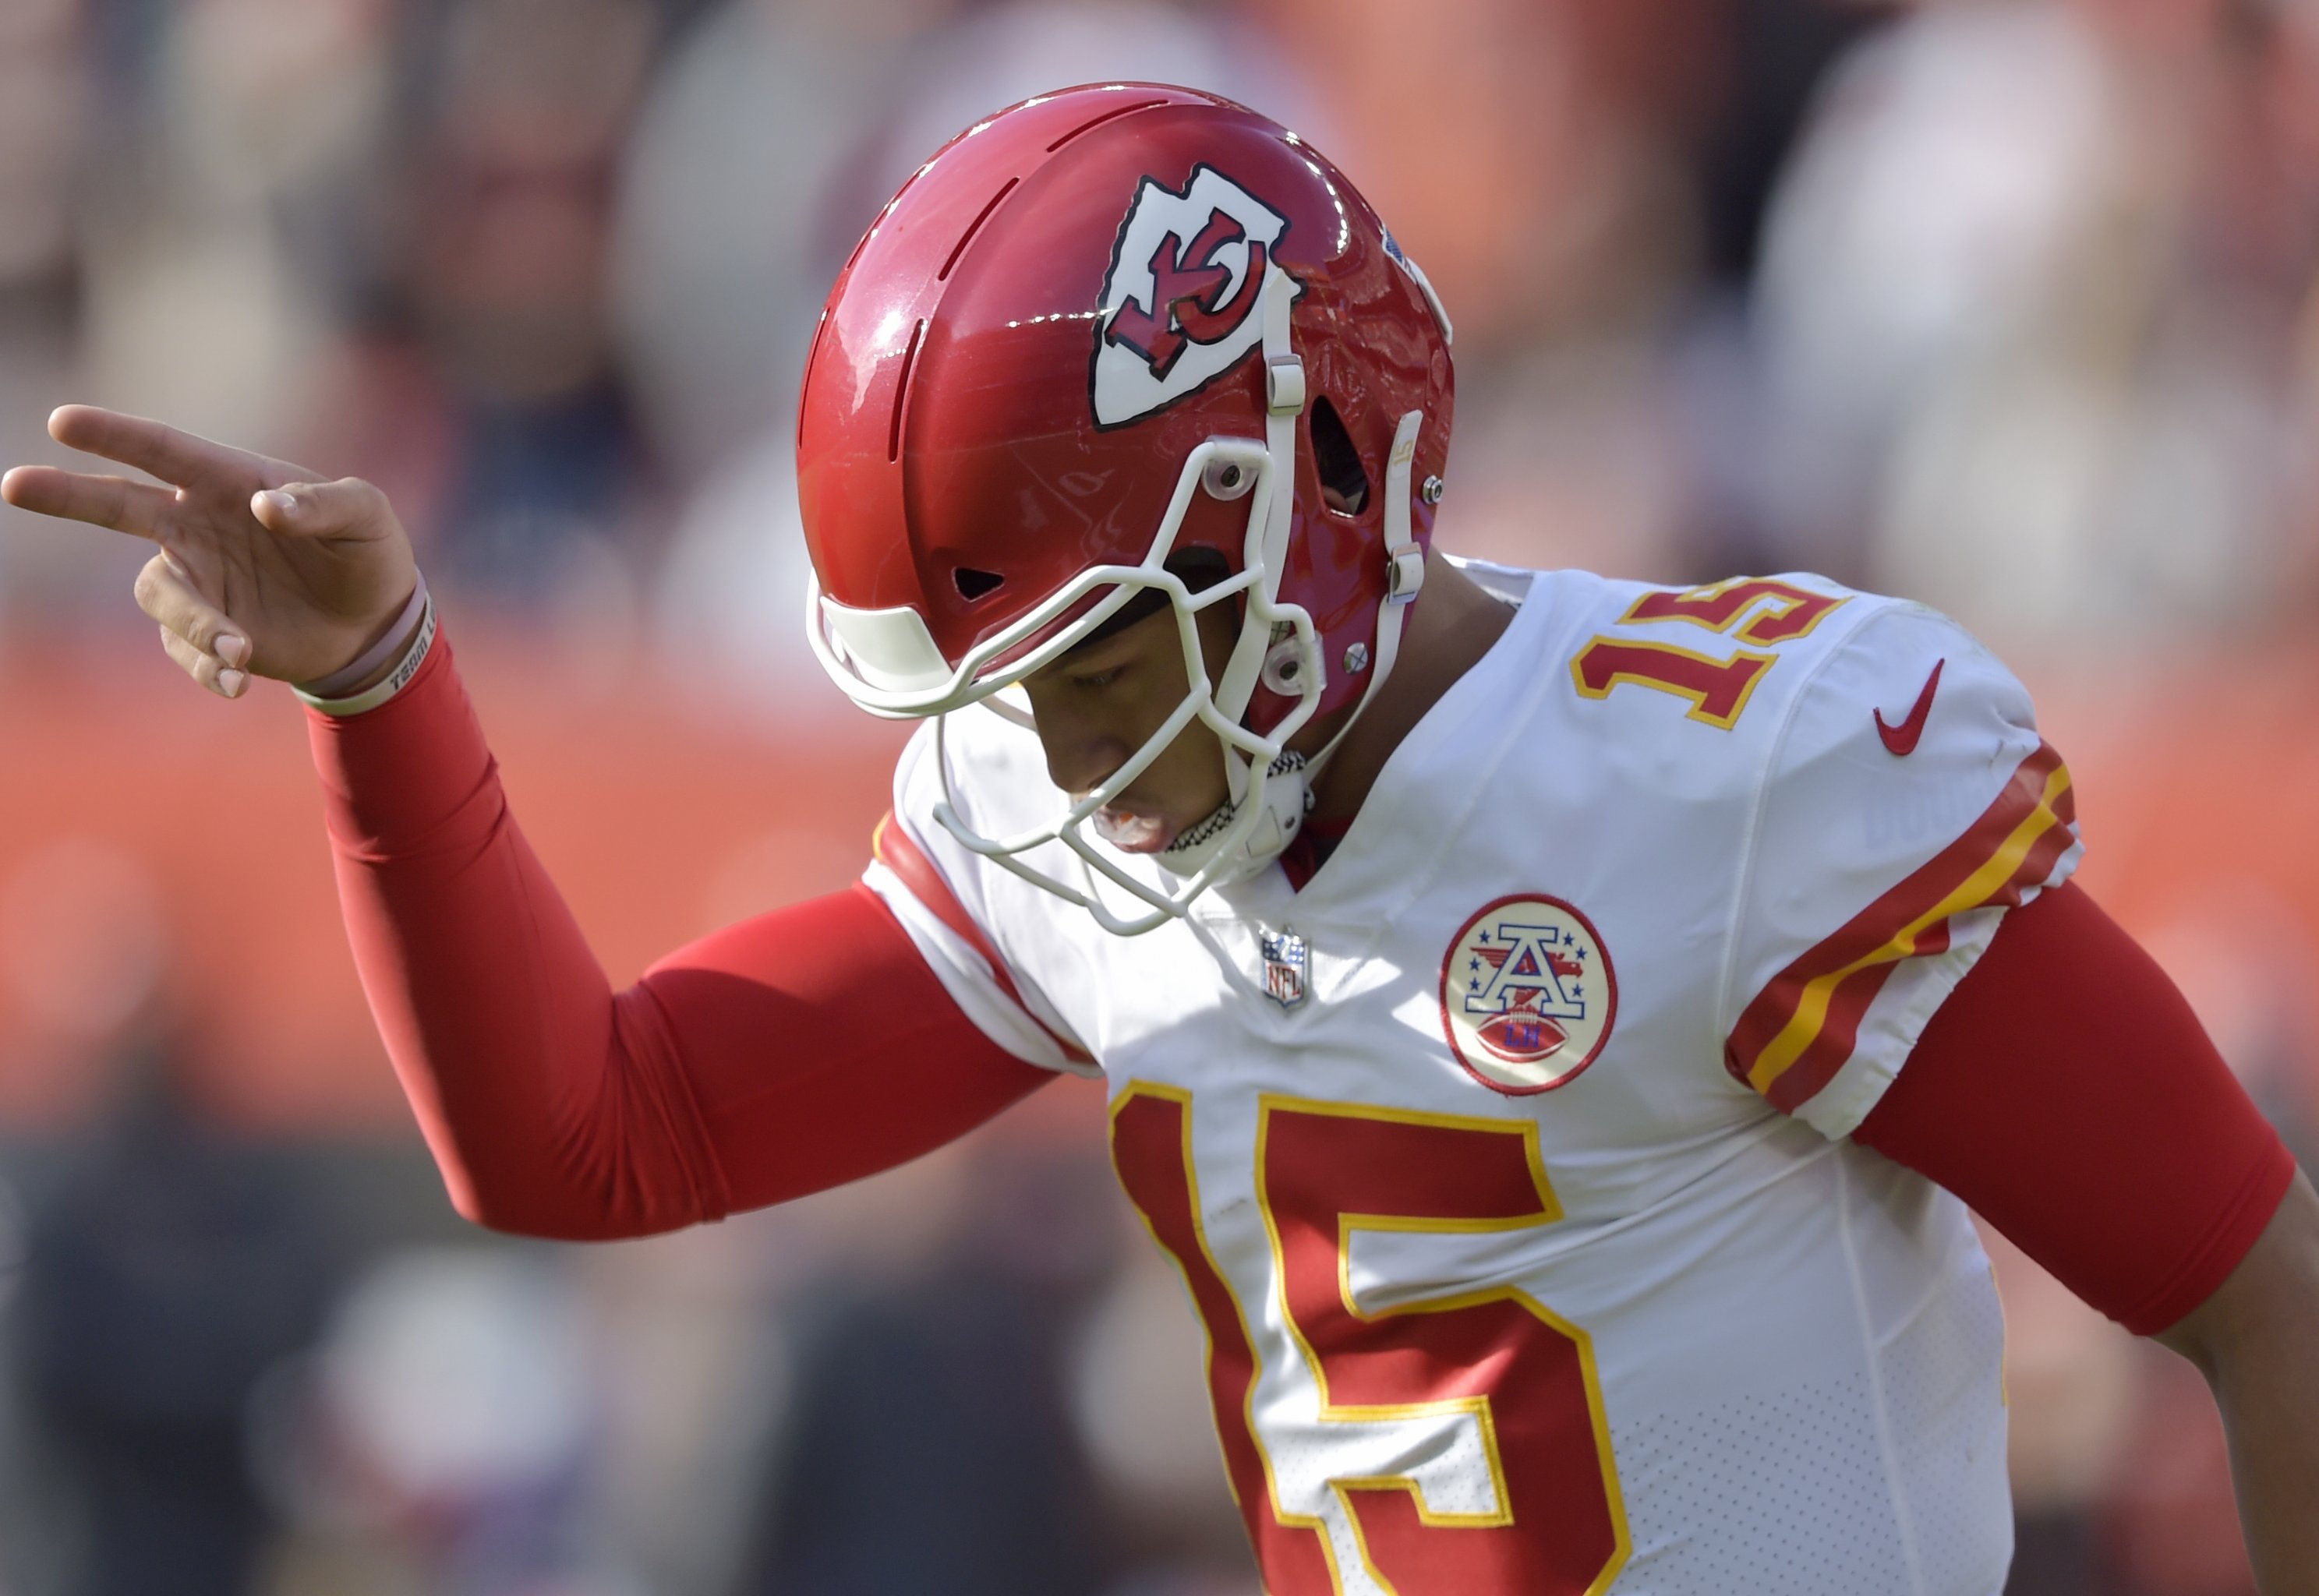 NFL's Random Catch Rules Took a Fumble Return Touchdown Away From the Chiefs